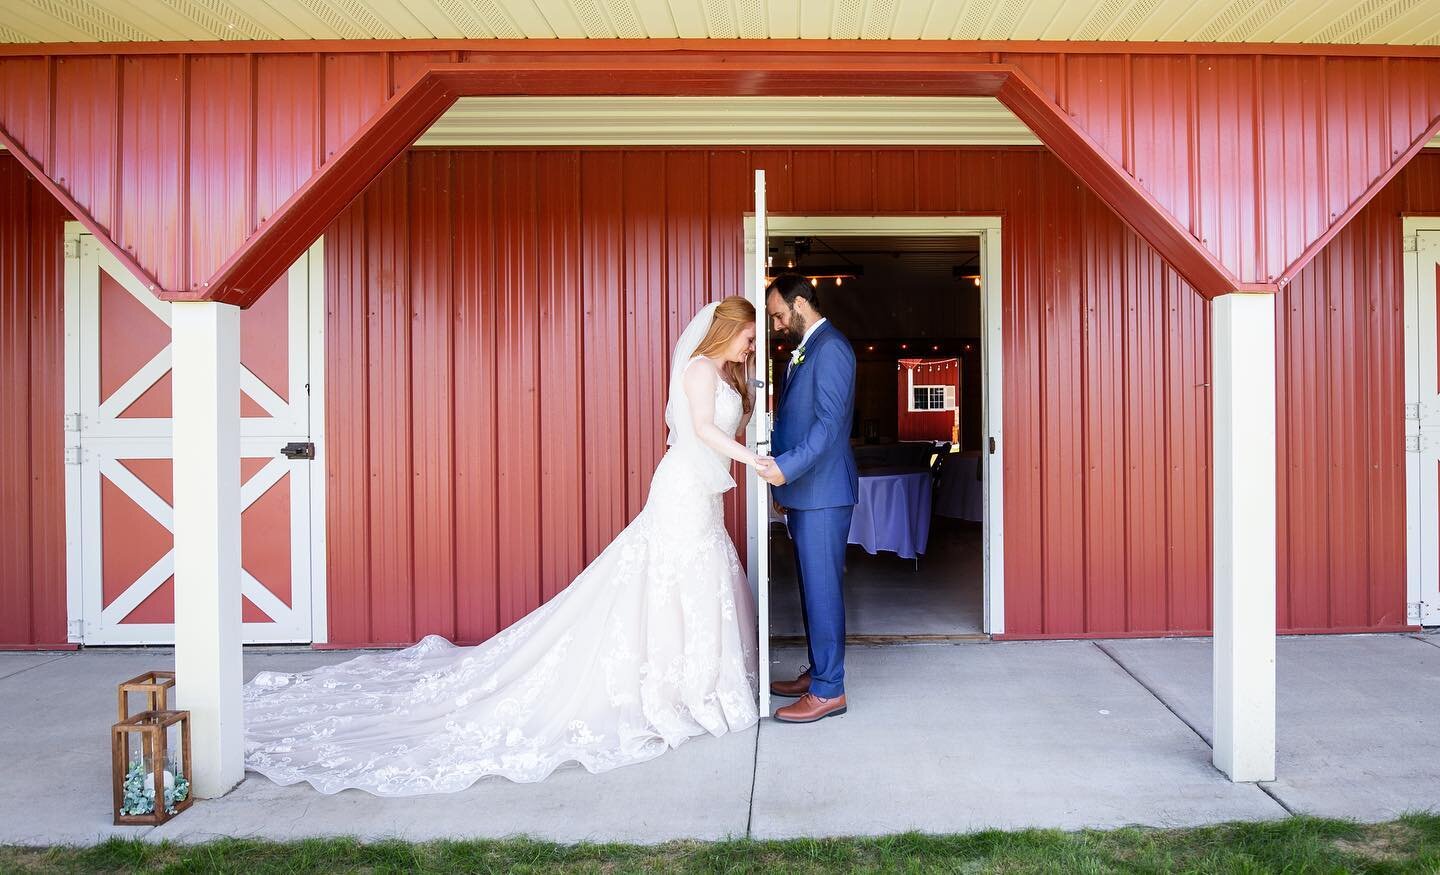 How sweet is this moment before tying the knot?! 🥰 
 
📸 @melissastephanphotography 
&bull; 
&bull; 
&bull; 
#minnesotawedding #barnvenues #northernmn #mnbrides #minnesotabrides #wedding #weddingday #crosslakemnwedding #crosslakemn #whitefishchain #